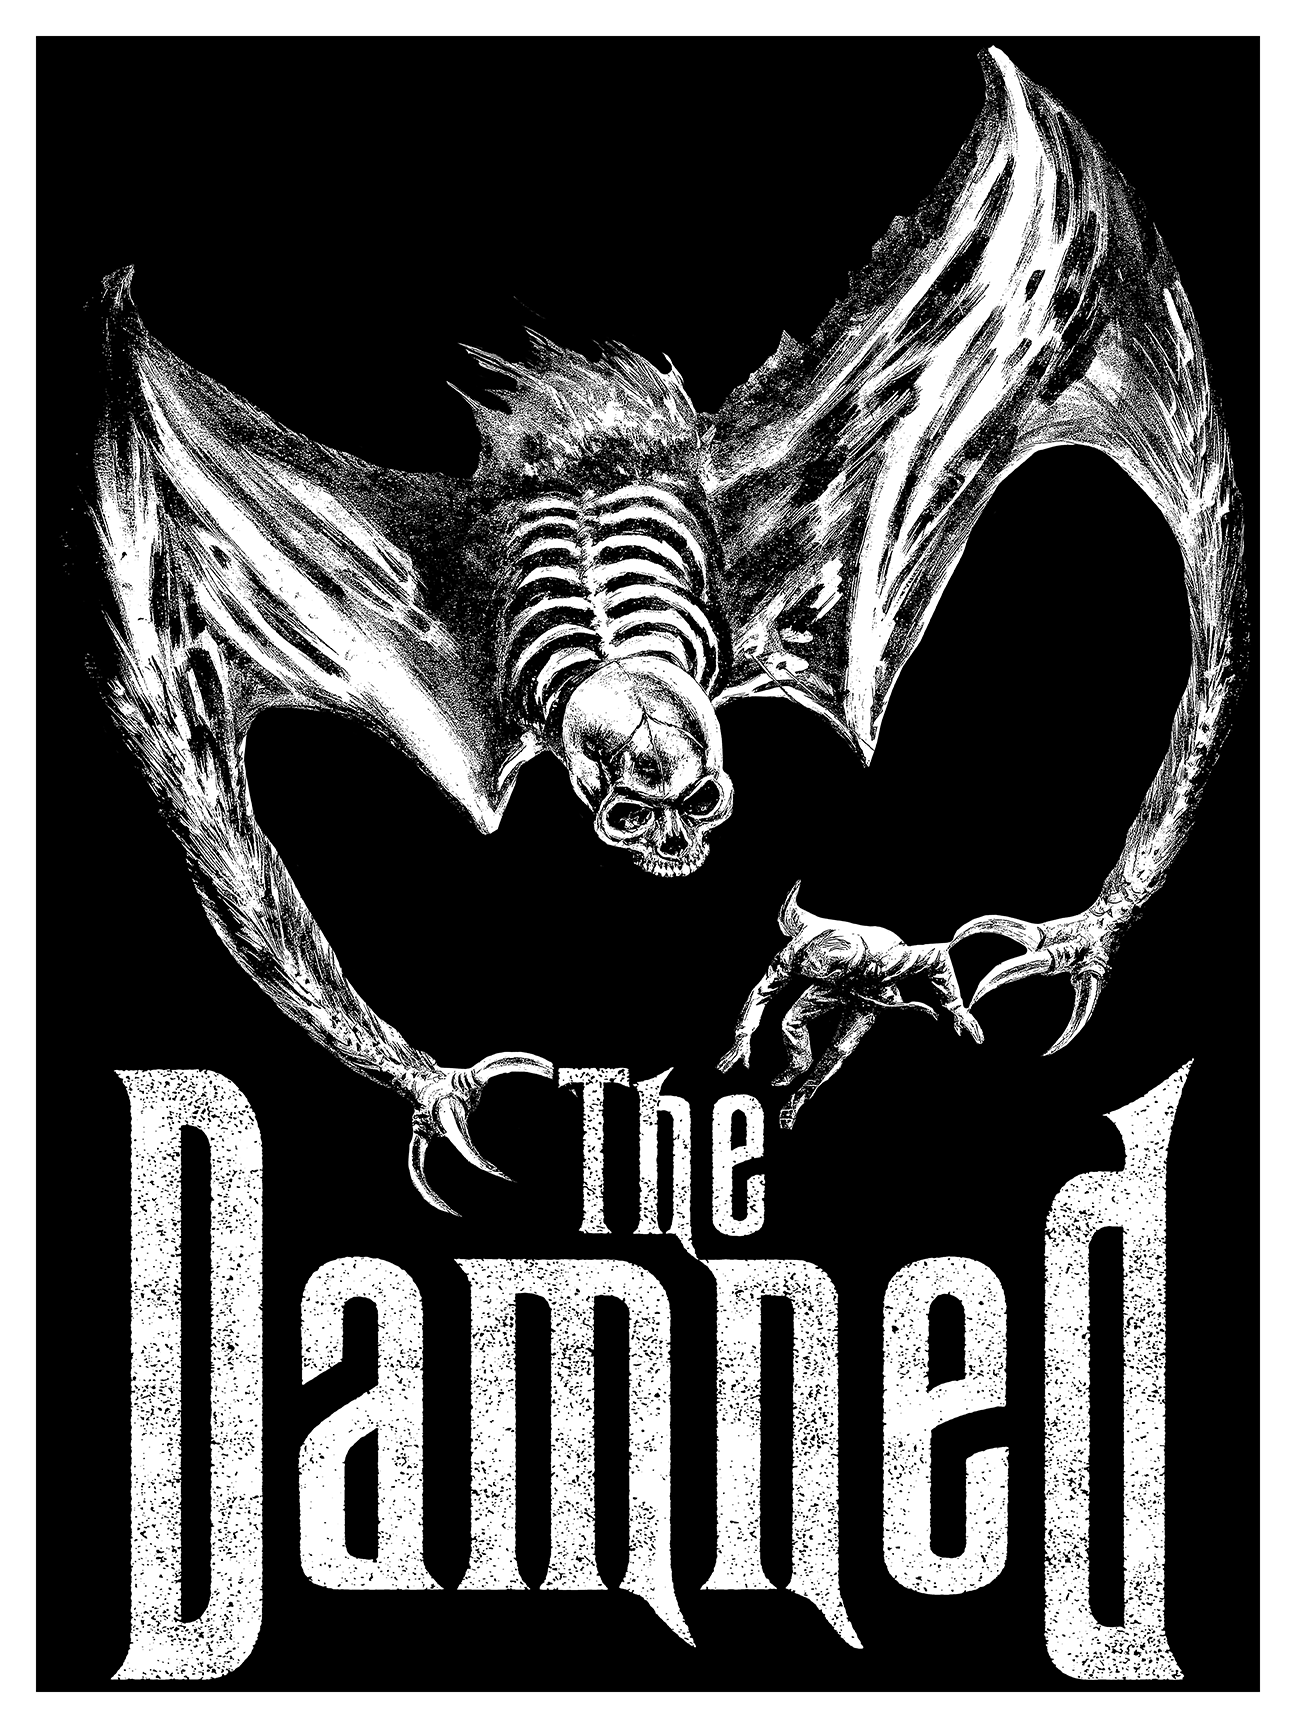 DAMNED "CREEPY BAT" 2022 TOUR LIMITED EDITION SILK SCREENED POSTER